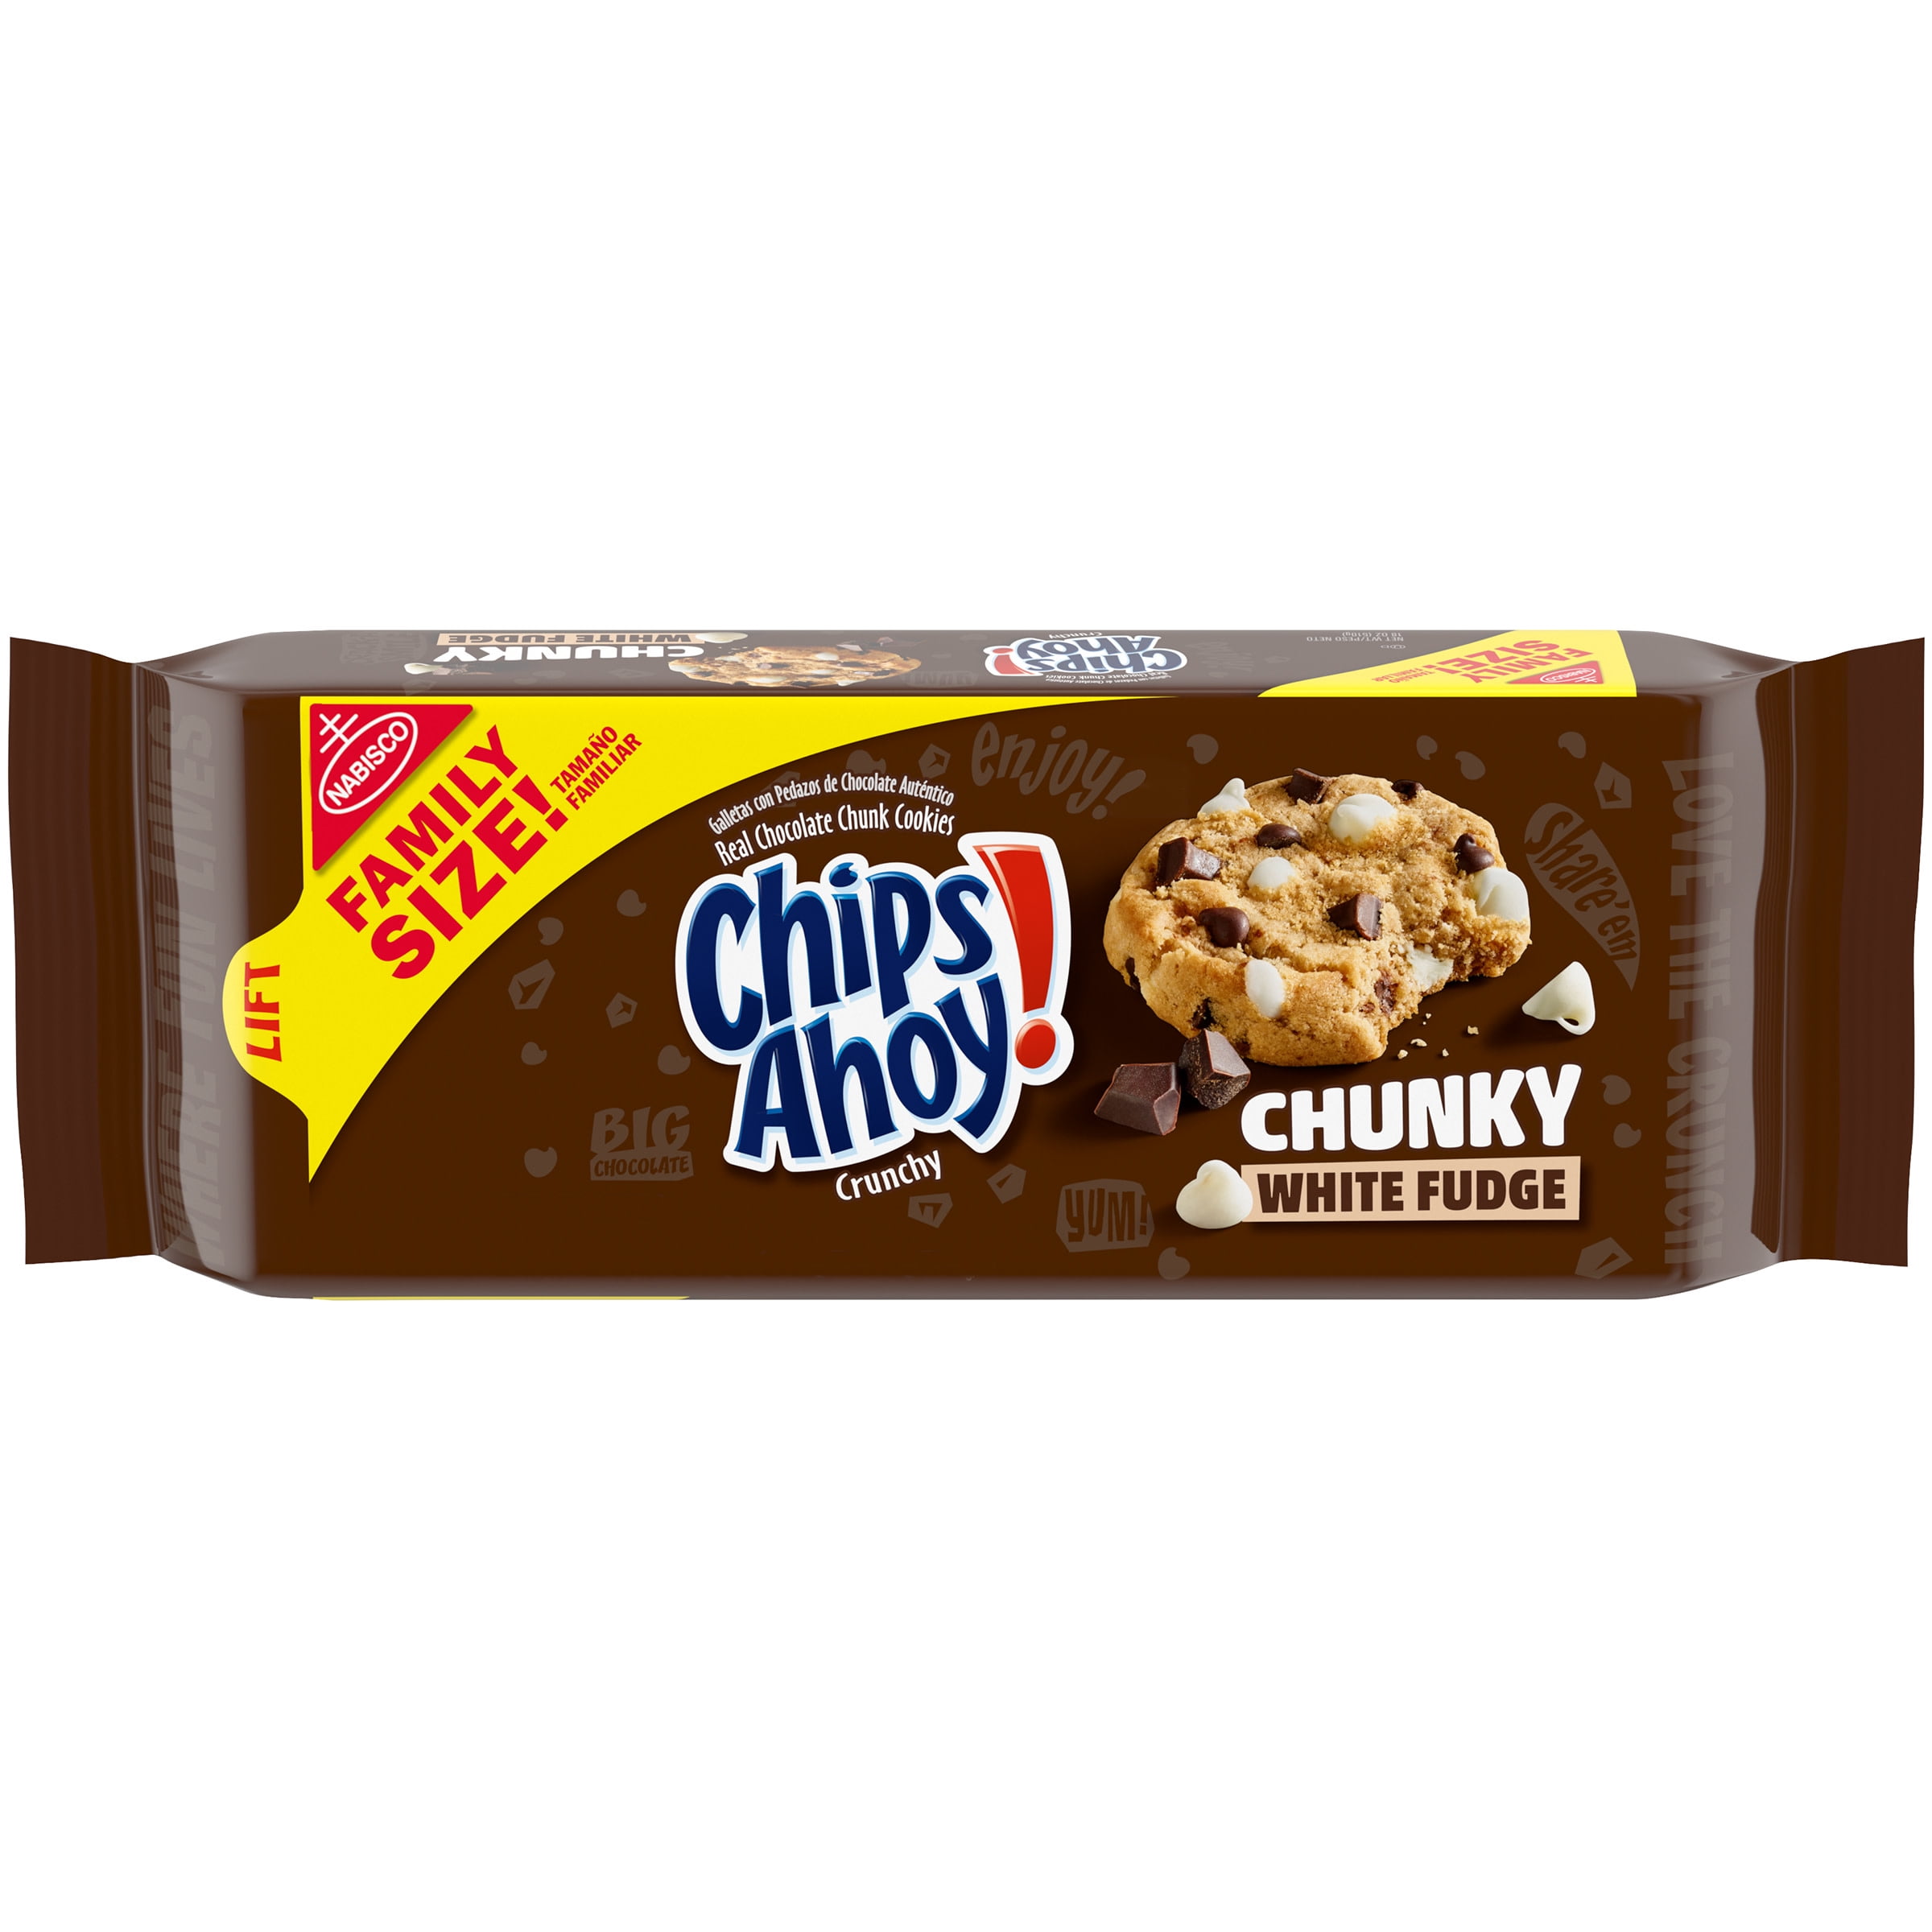 CHIPS AHOY! Crunchy White Fudge Chocolate Chunk Cookies, Family Size, 18 oz Pack